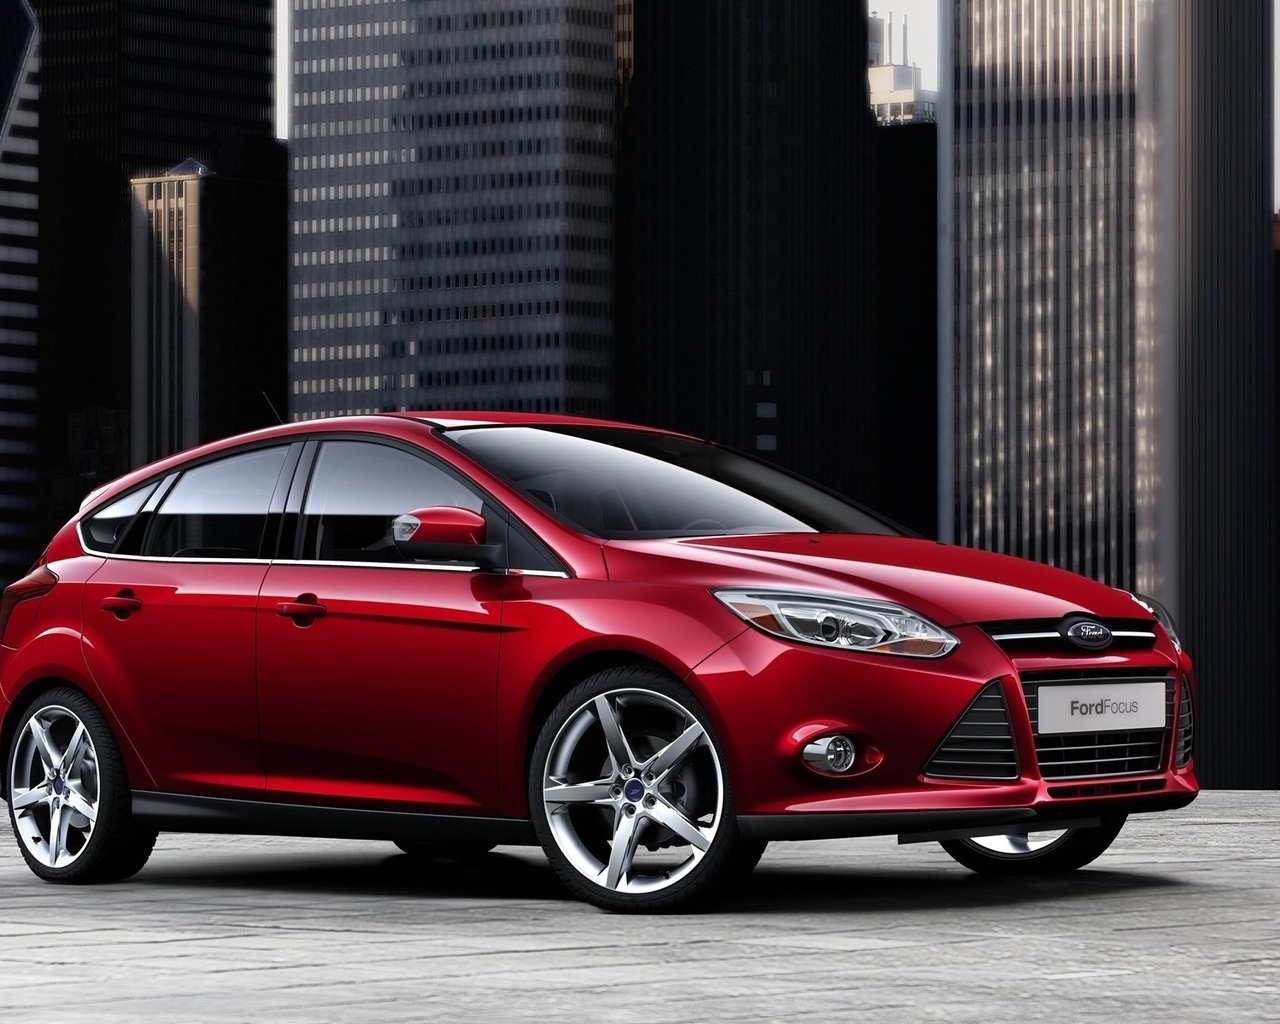 New Ford Focus 2011 for 1280 x 1024 resolution